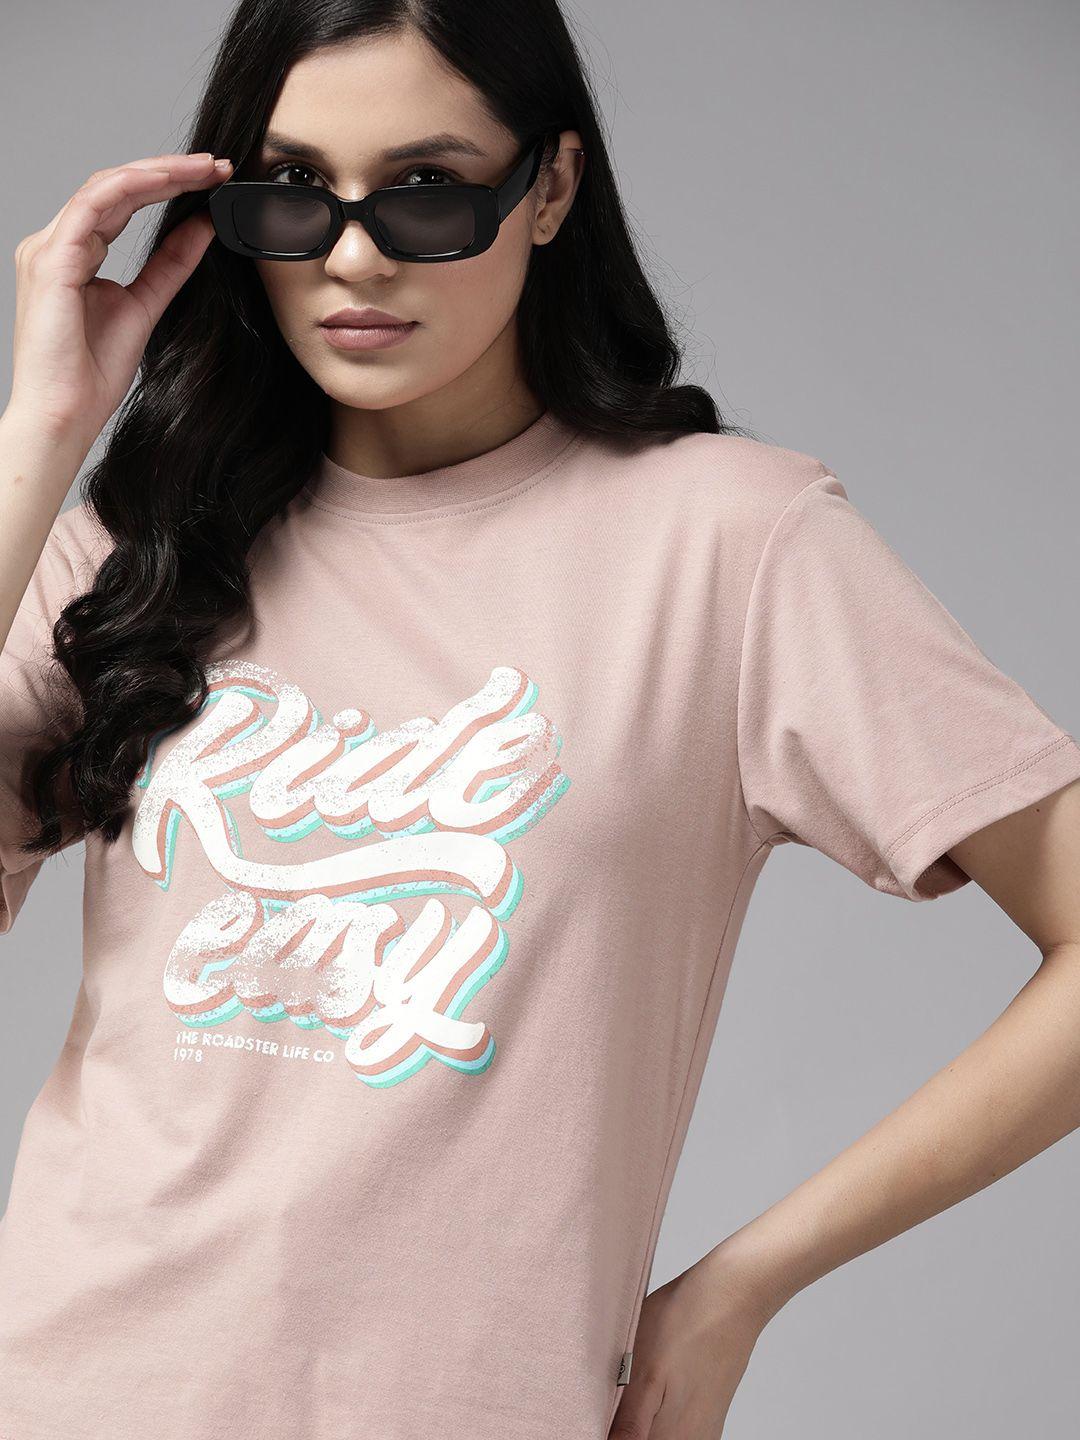 the roadster lifestyle co. typography printed t-shirt